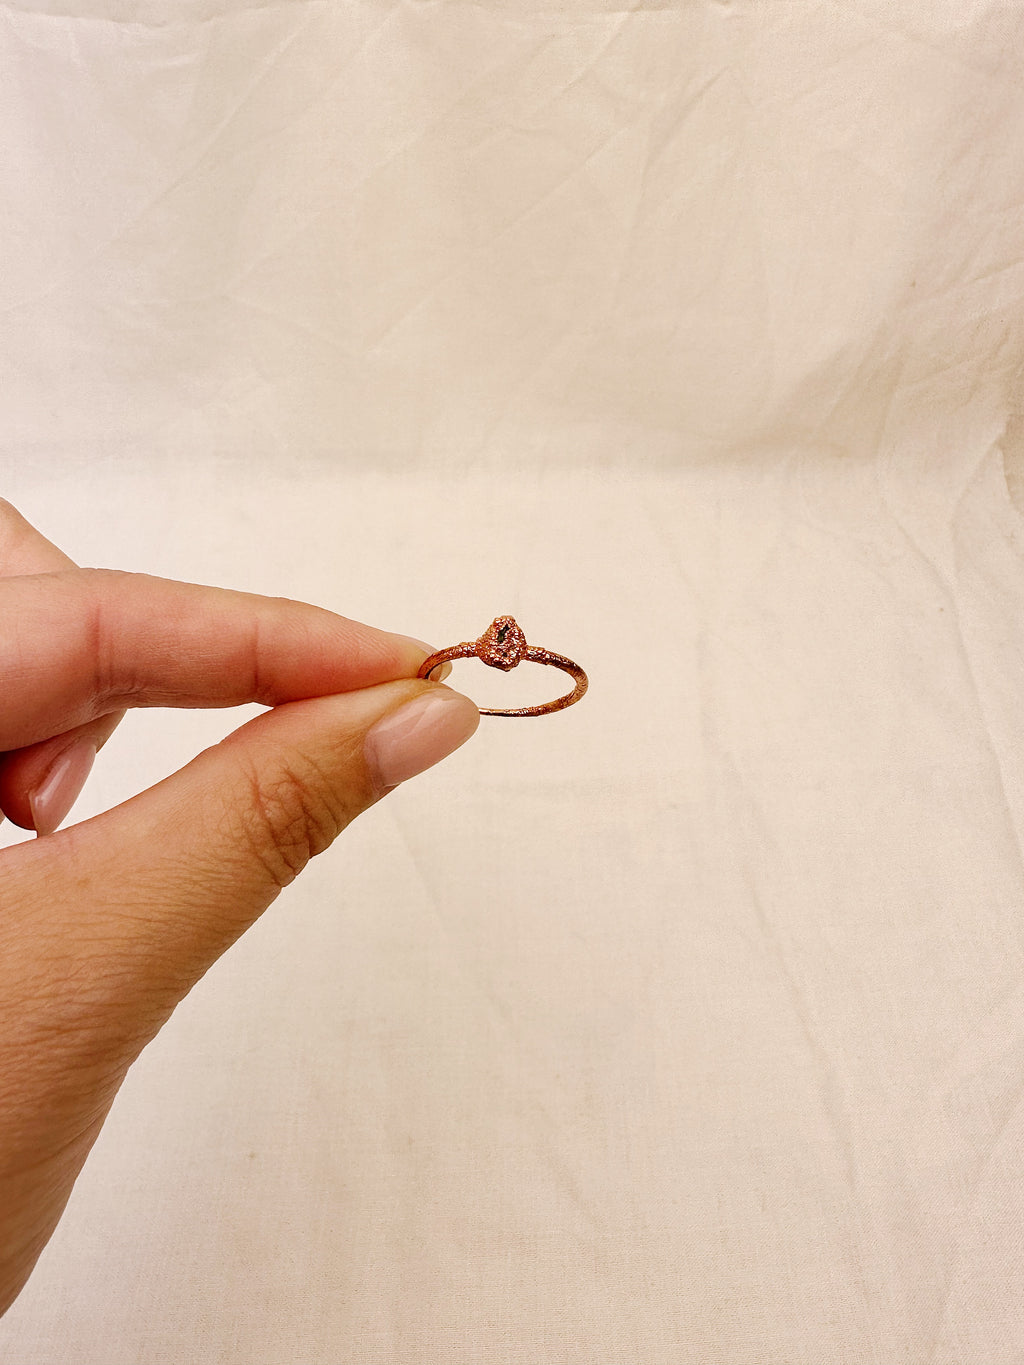 Copper ring - size Q 1/2